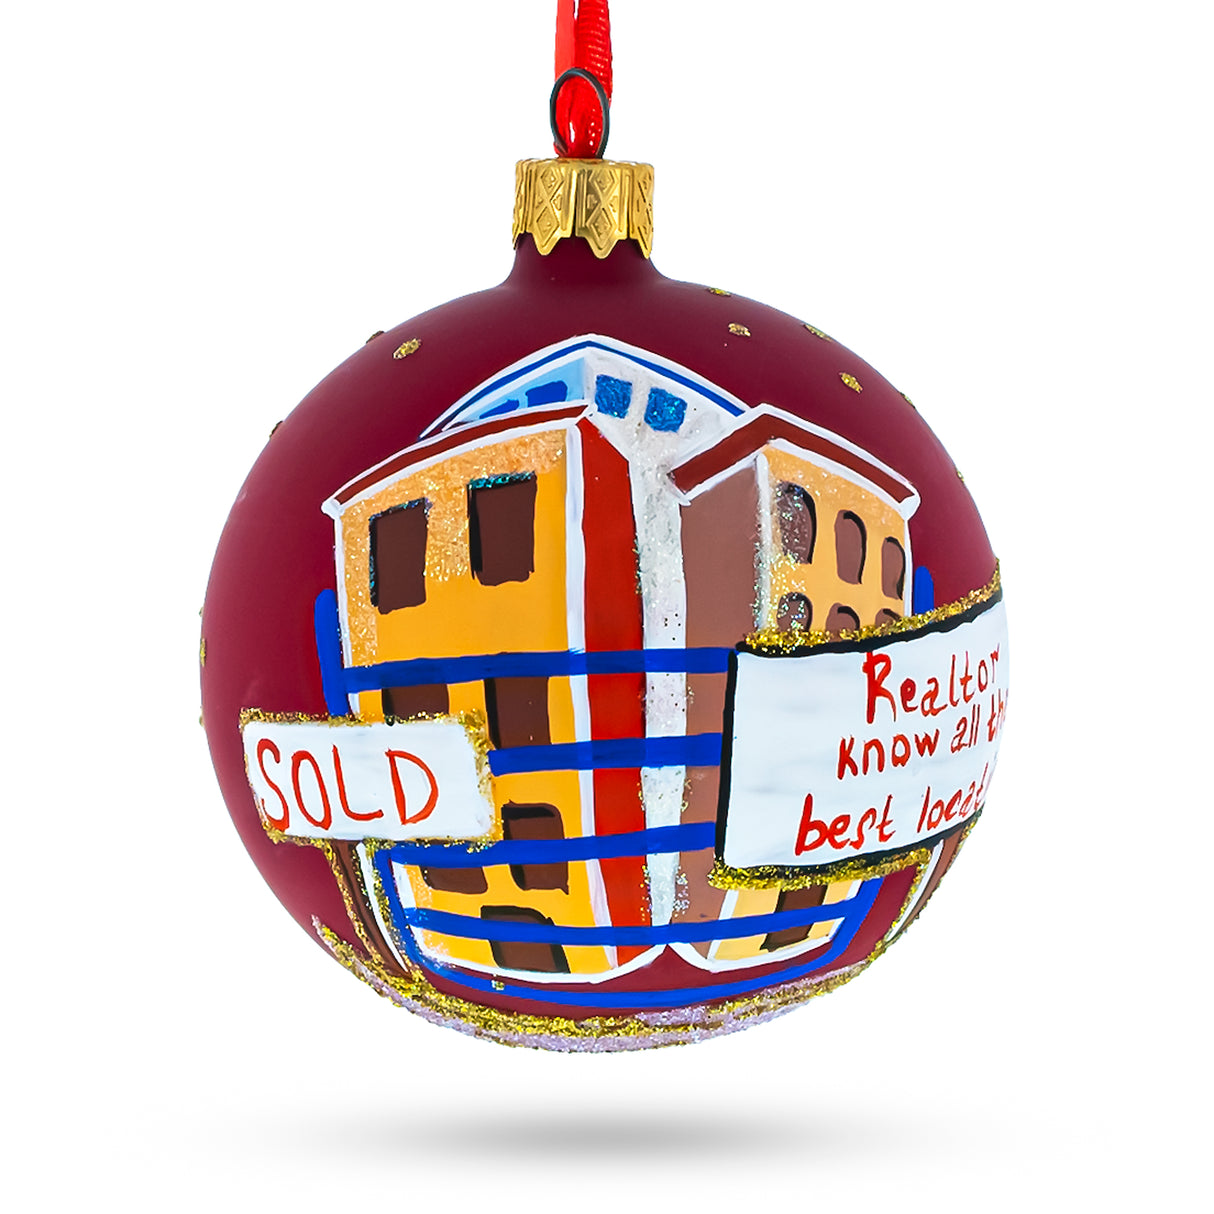 Real Estate Agent Blown Glass Ball Christmas Ornament 3.25 Inches in Red color, Round shape